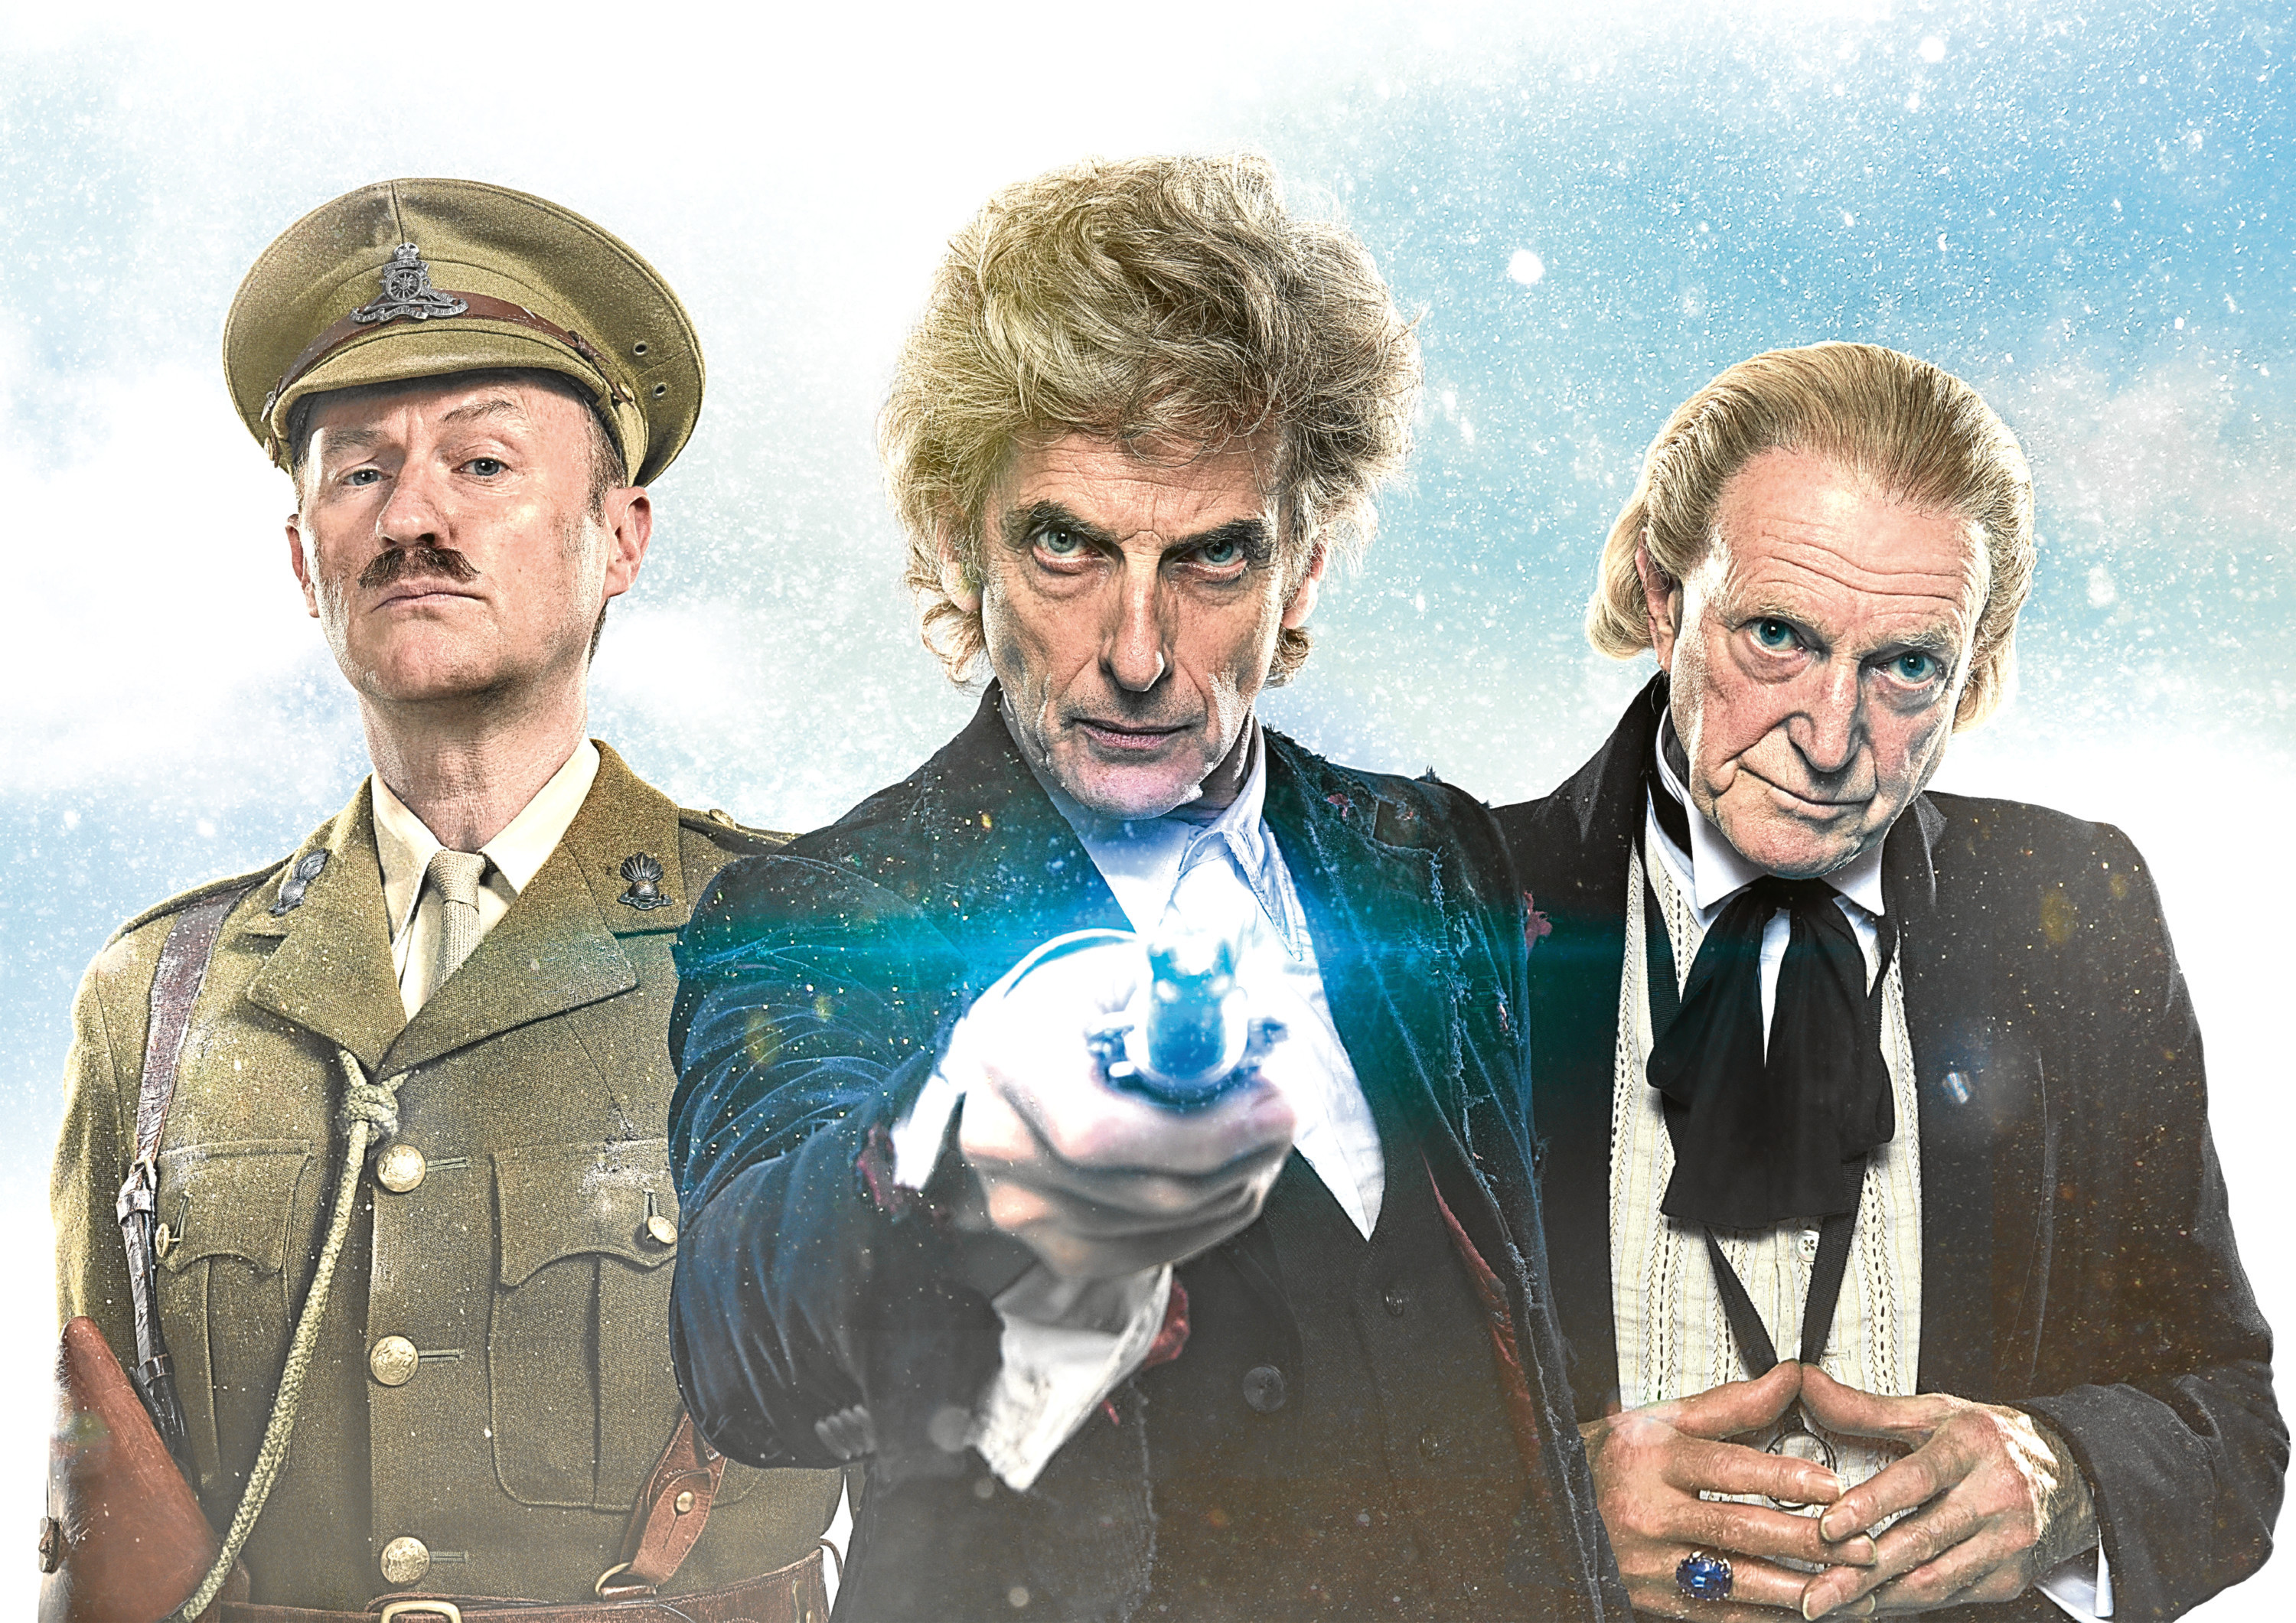 Mark Gatiss, Peter Capaldi and David Bradley all star in this year's Doctor Who Christmas special (BBC / Ray Burmiston)